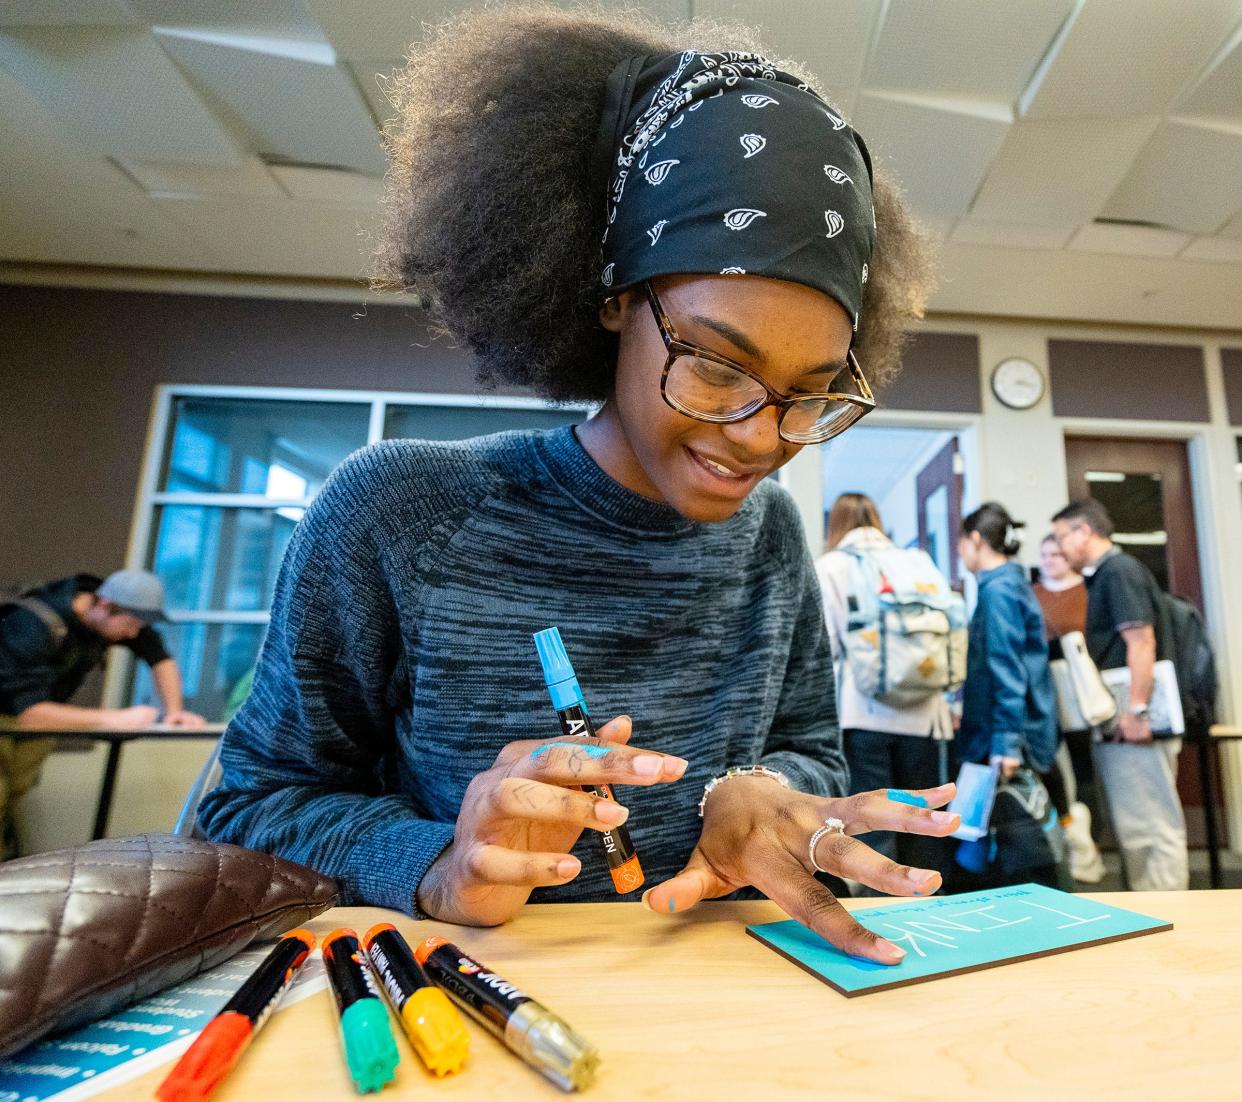 KaiJay Jiles, a theater administration major, writes a positive message on a tile for a loved one during the mental health resource fair at Concordia University Wisconsin on Sept. 20.